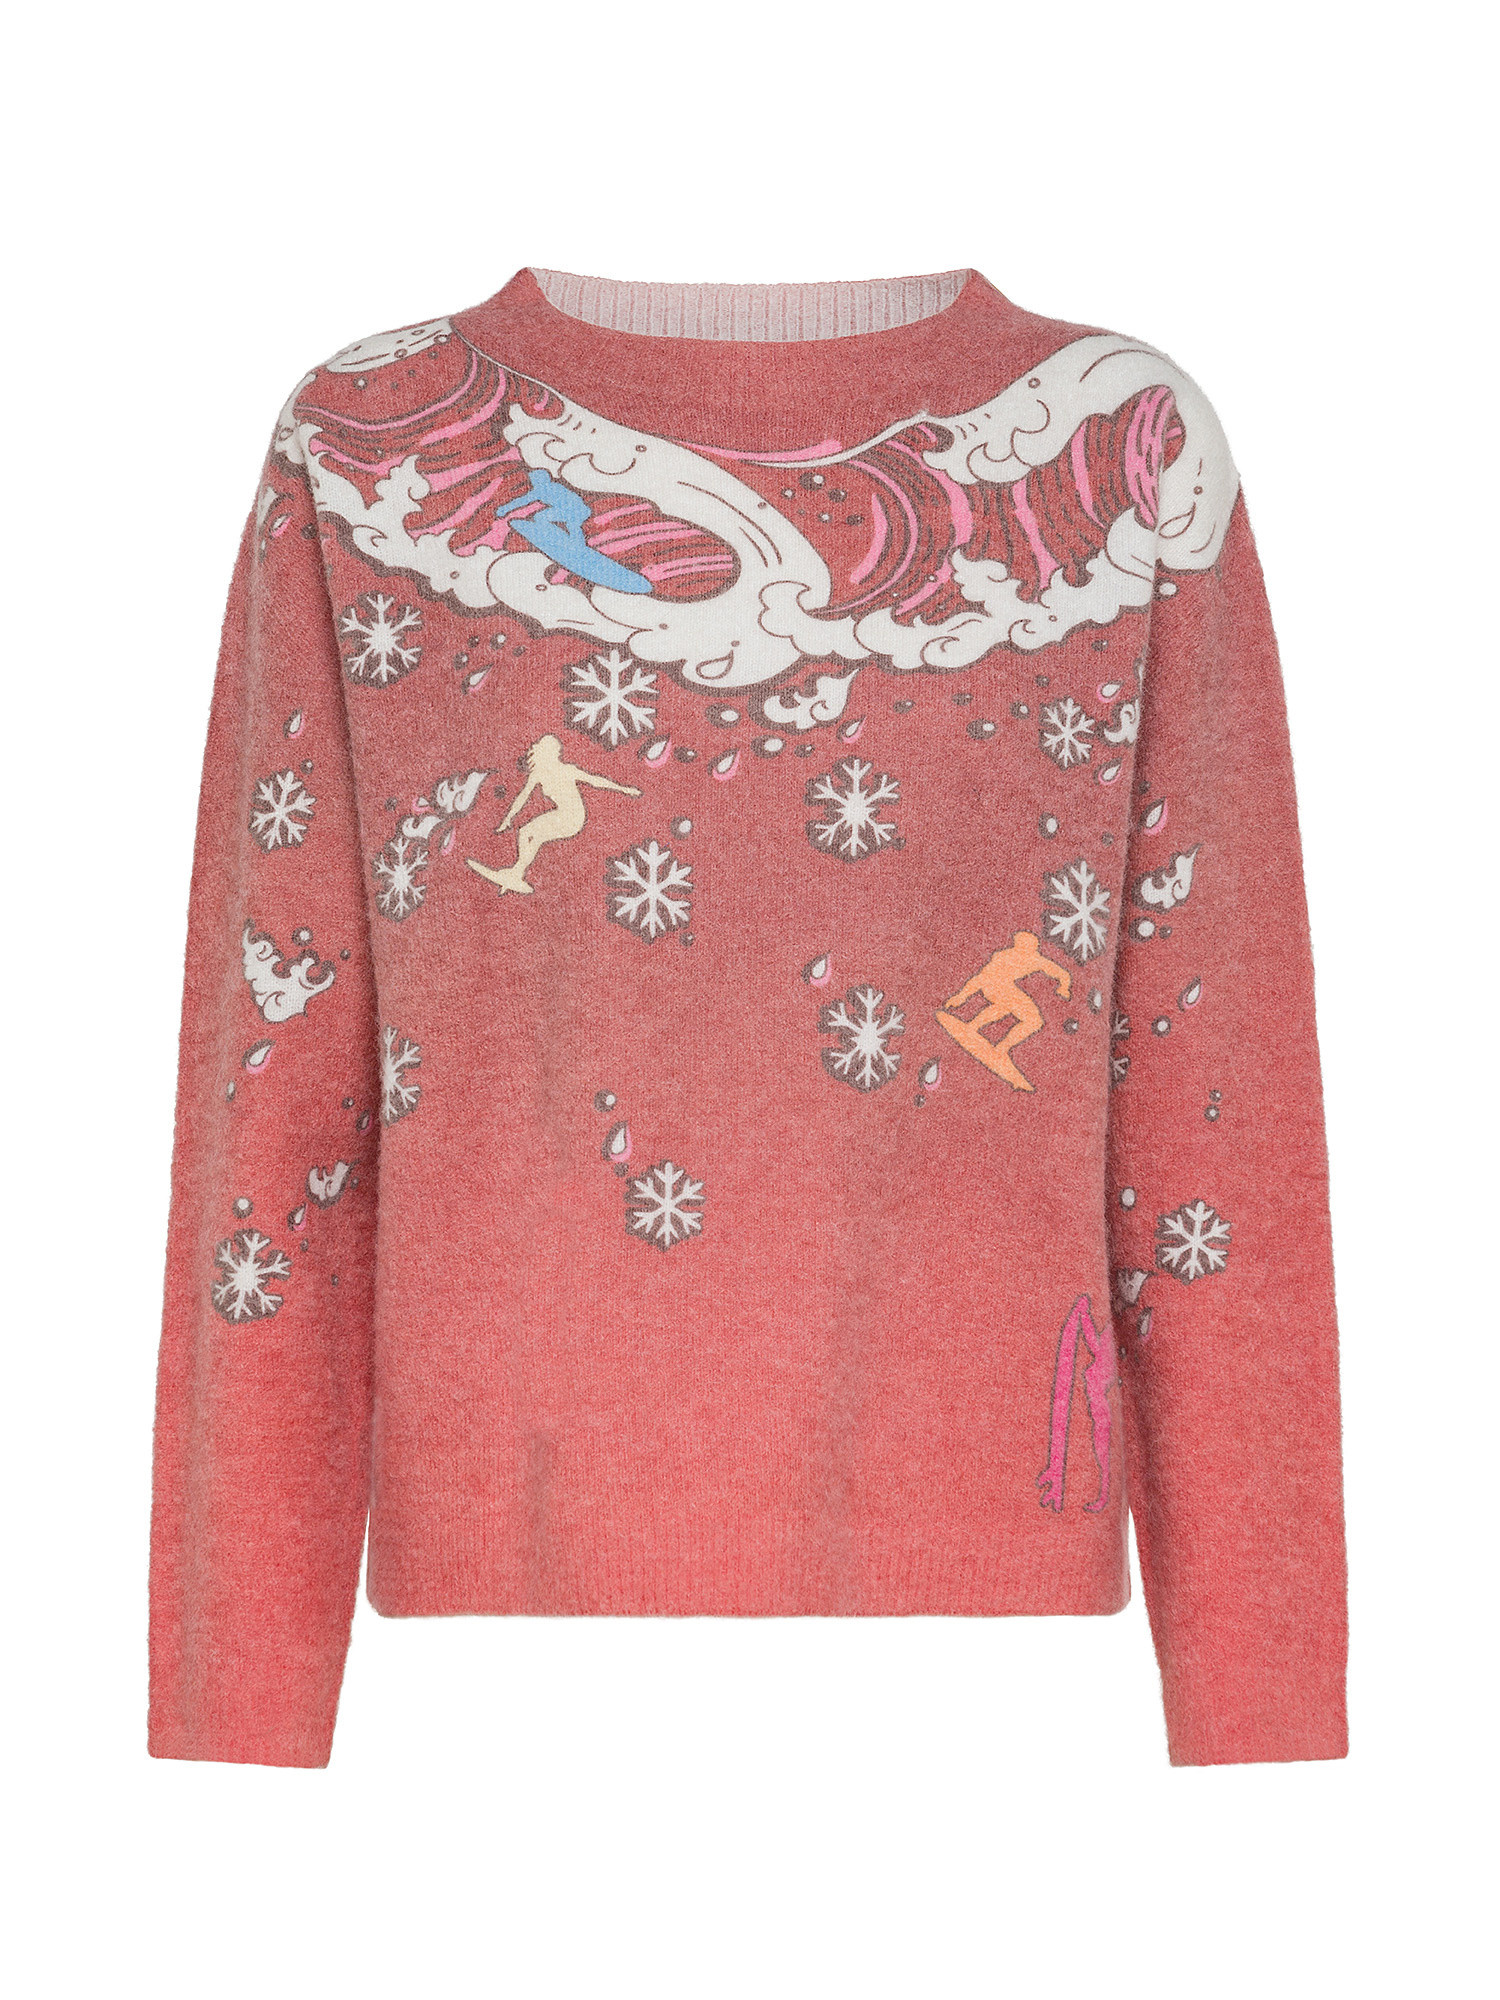 Pullover The Surfer’s Christmas by Paula Cademartori, Rosso, large image number 0